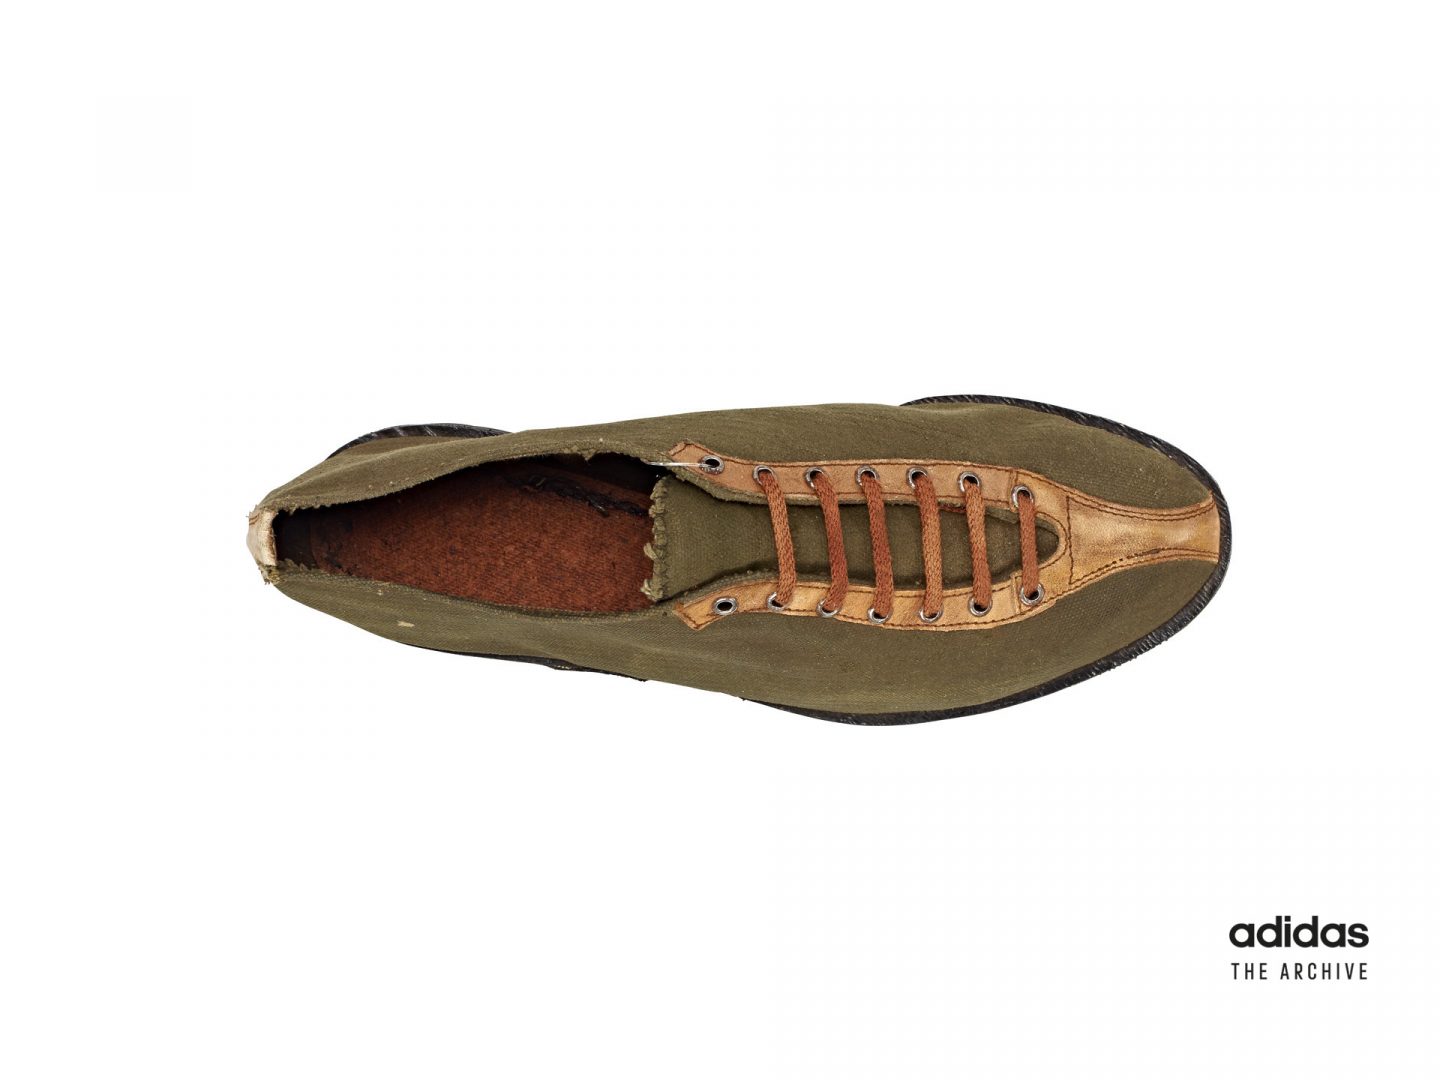 In the period immediately after the war supplies of traditional shoemaking materials like leather were in short supply in Germany. Adolf resorted to producing shoes from leftover war materials, such as this one made from tent canvas. ©Studio Waldeck Photographers